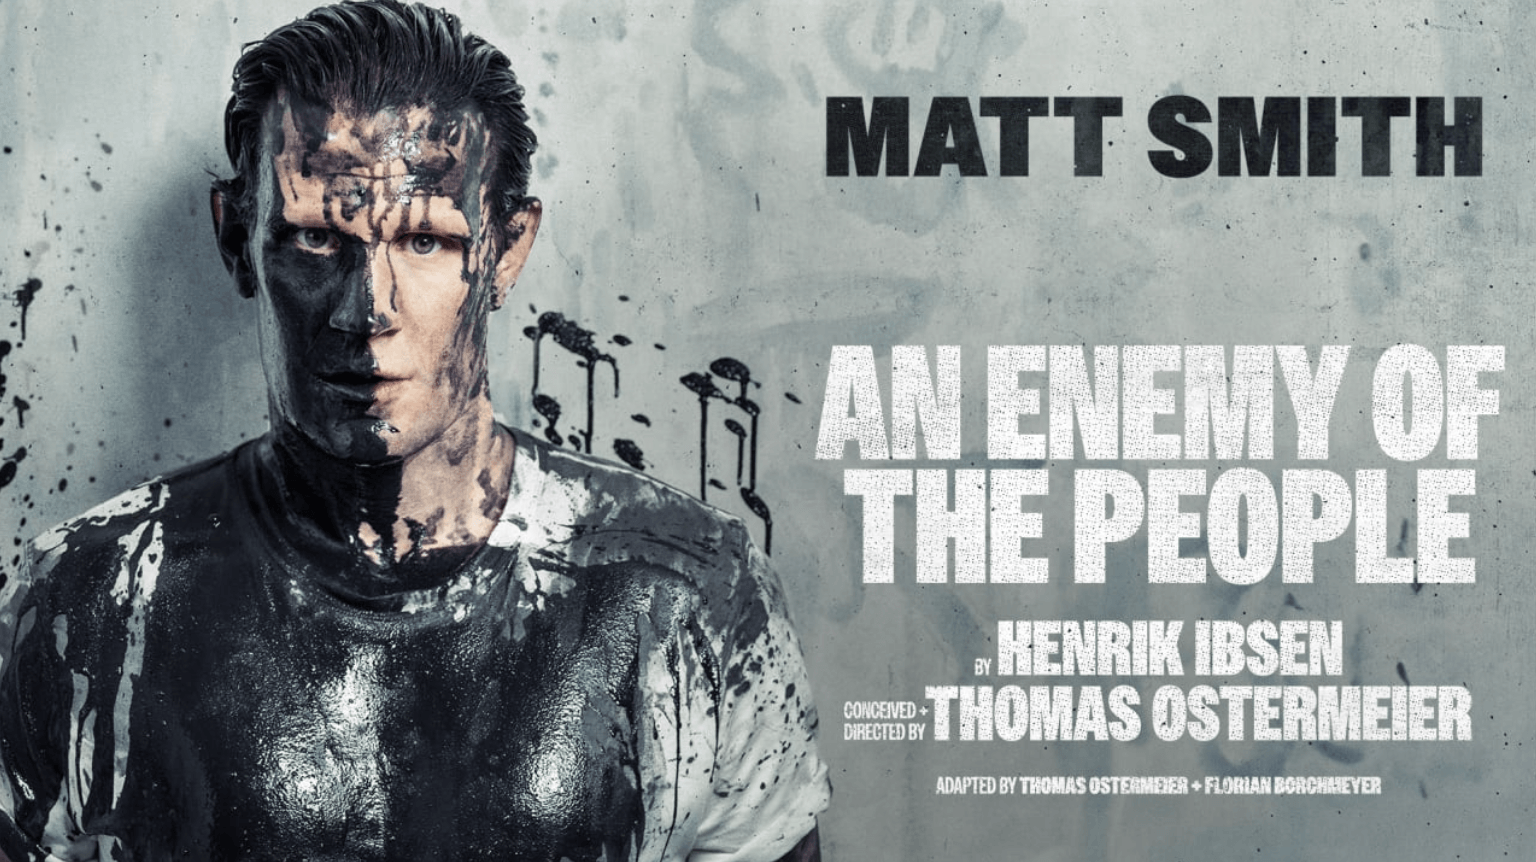 Matt Smith stars in the critically acclaimed An Enemy of the People, Thomas Ostermeier’s bold reimagining of the classic play by Henrik Ibsen.